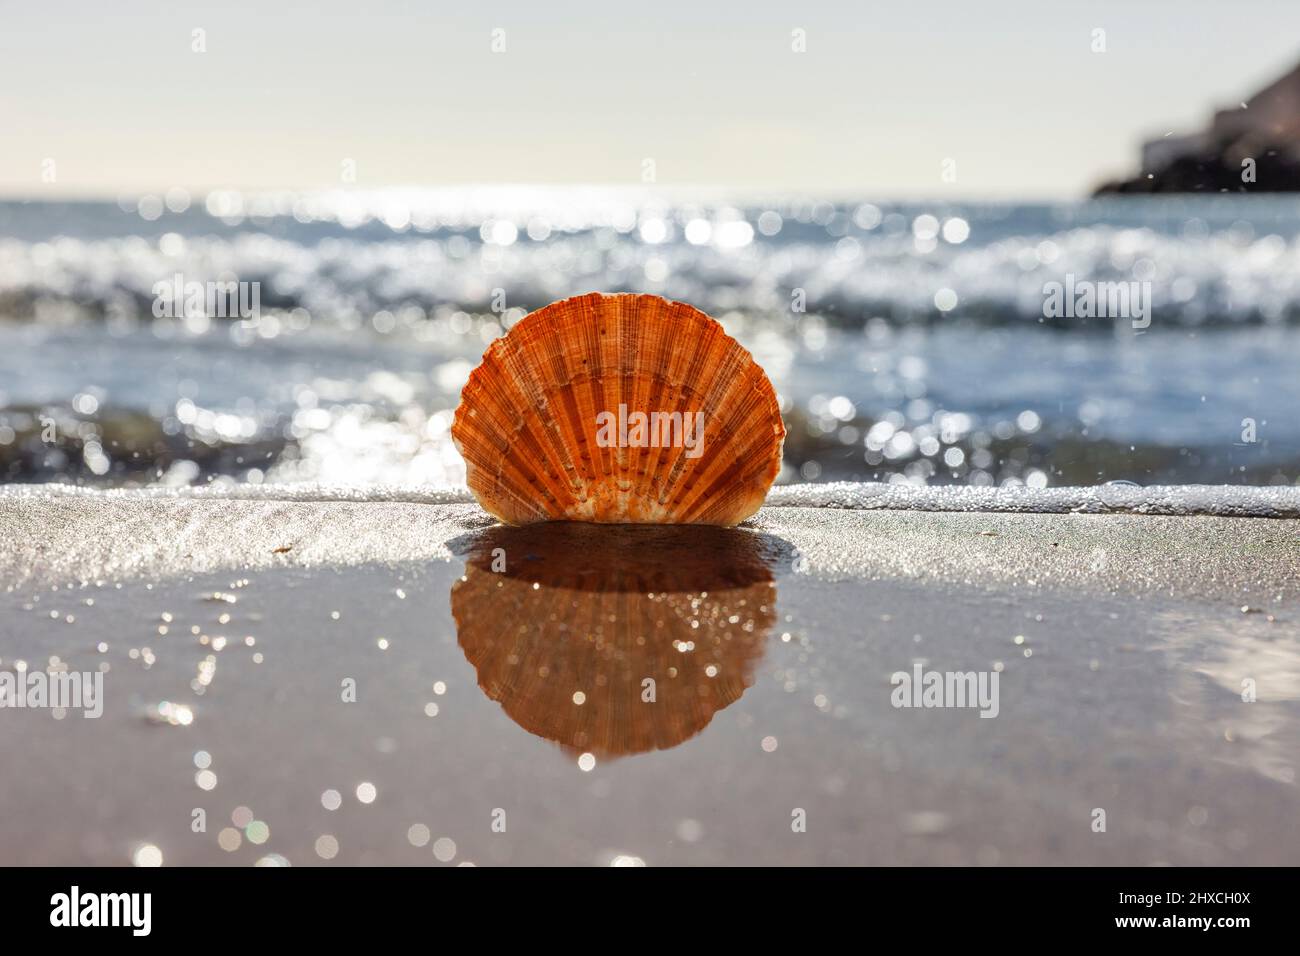 Scallop on beach with sea in background Stock Photo